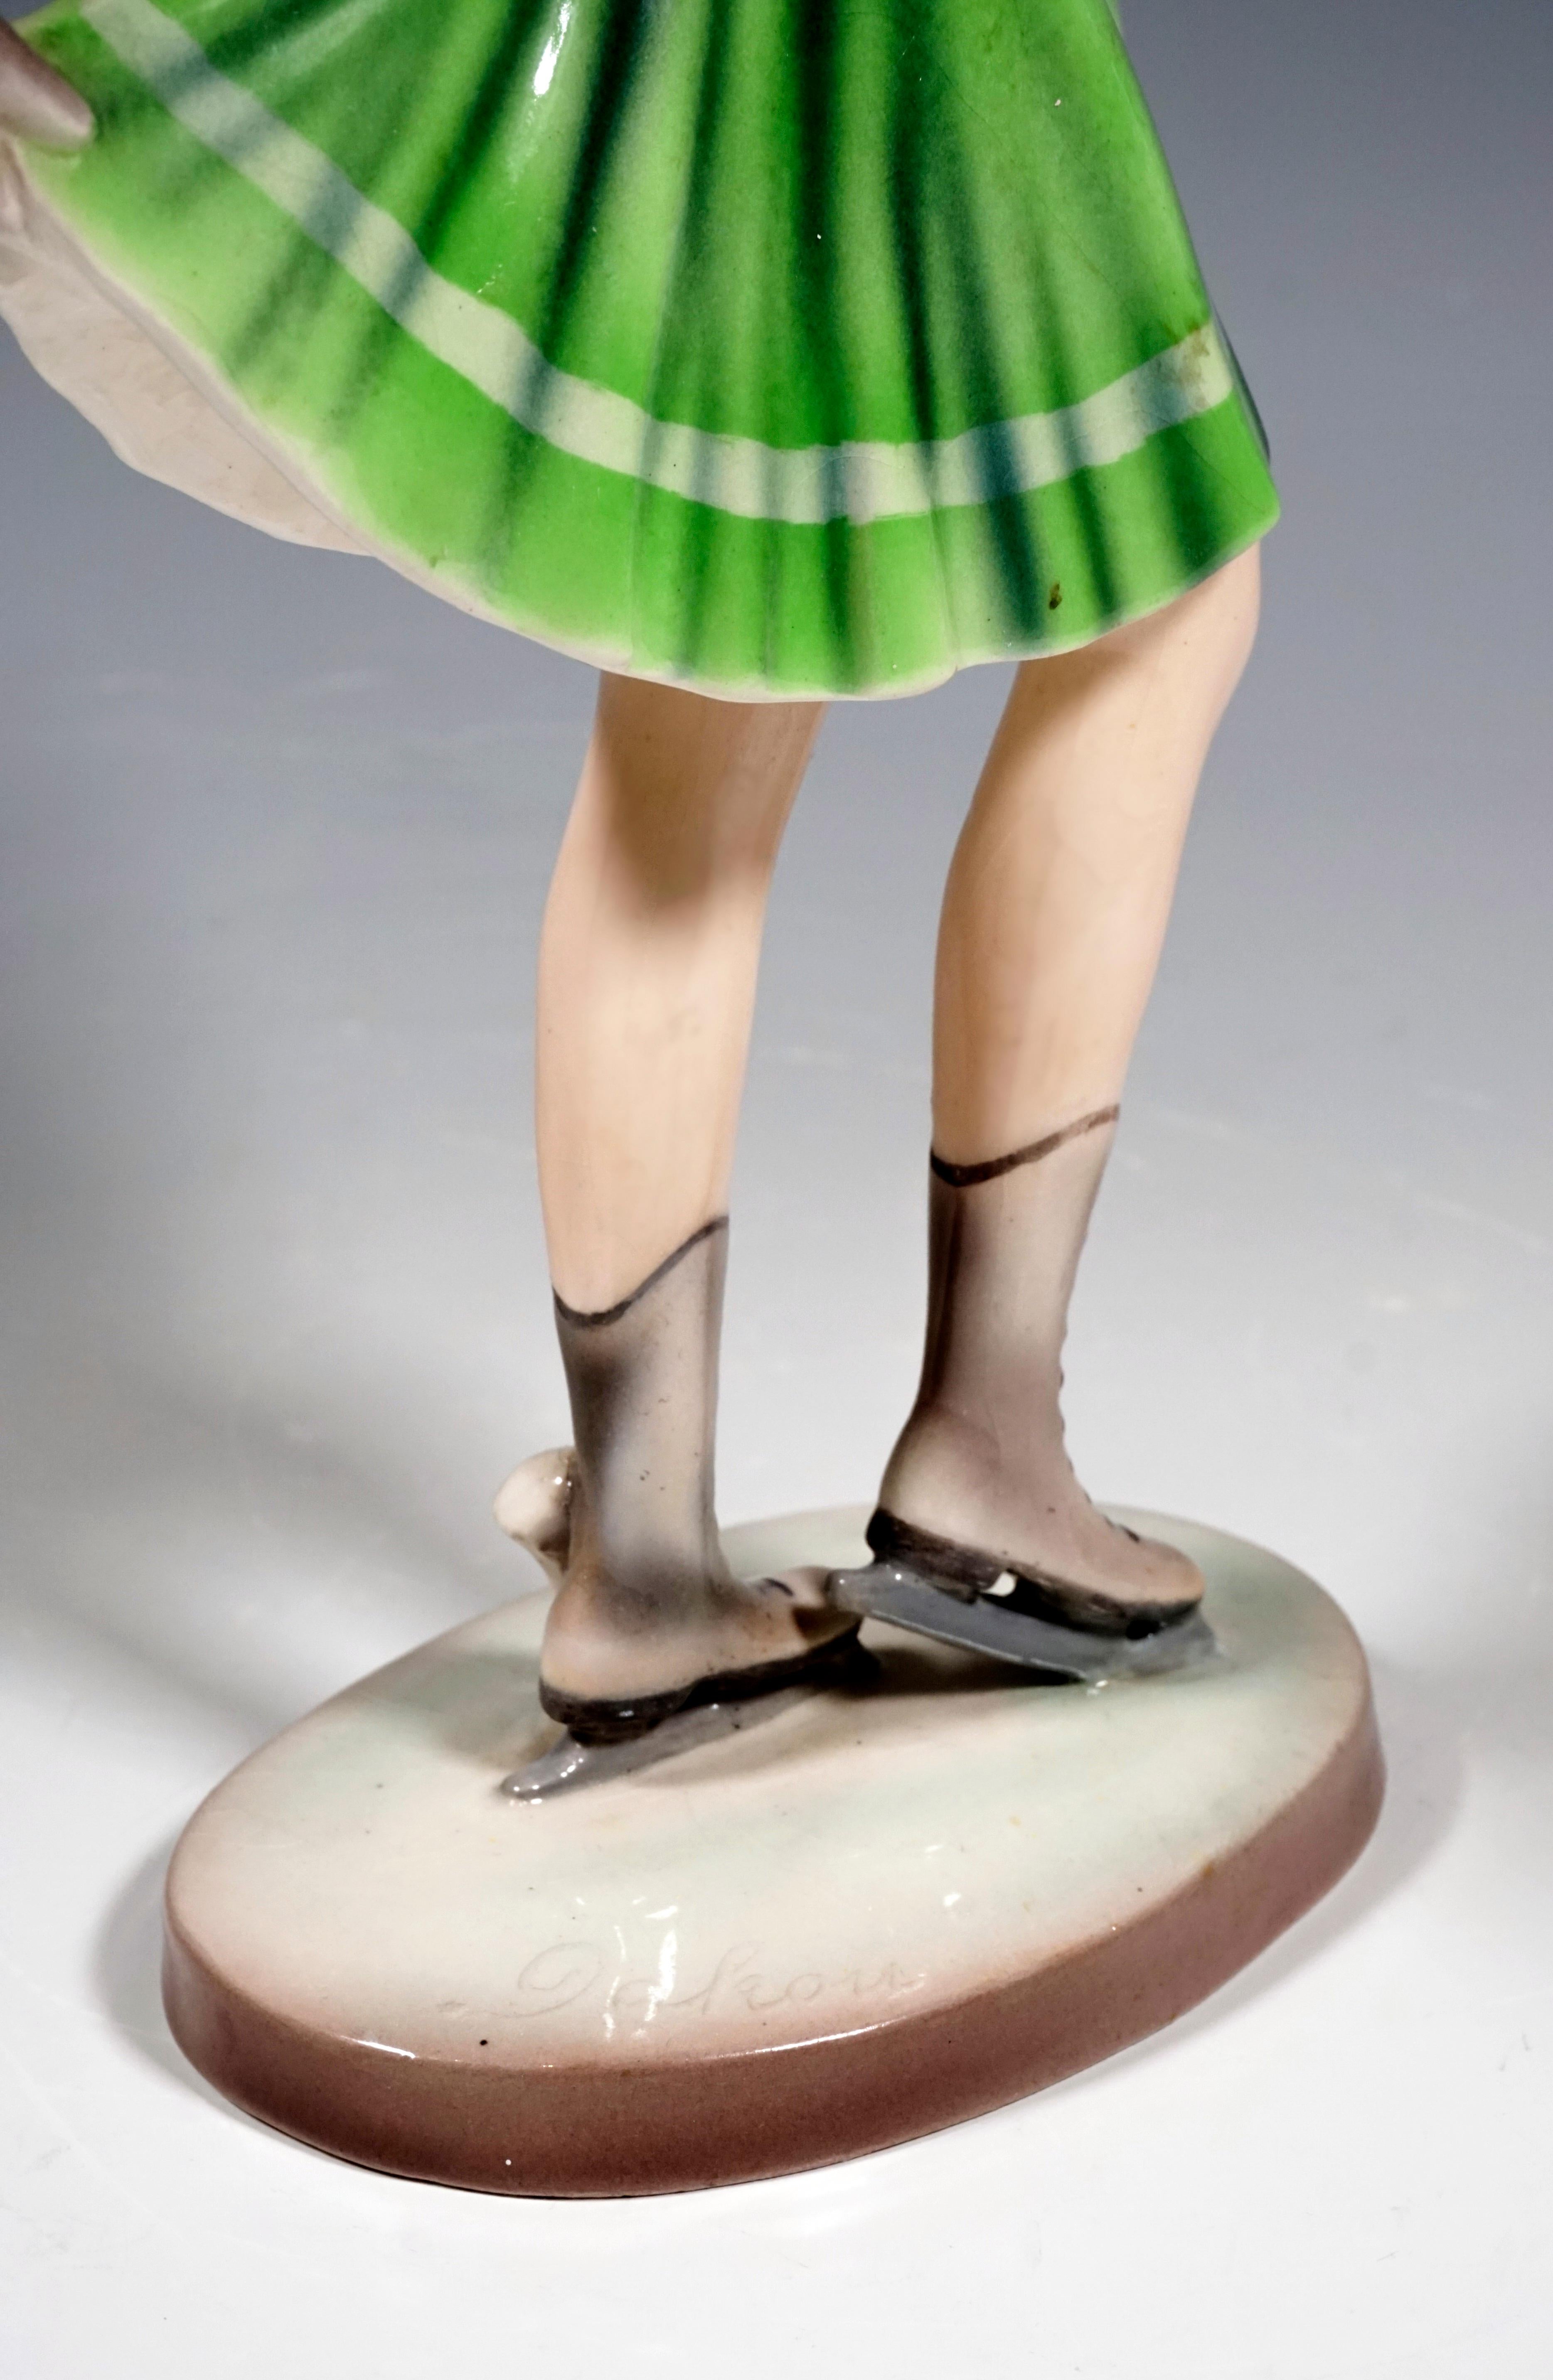 Goldscheider Art Deco Figurine 'The Ice Skater' by Stephan Dakon, circa 1937 In Good Condition For Sale In Vienna, AT